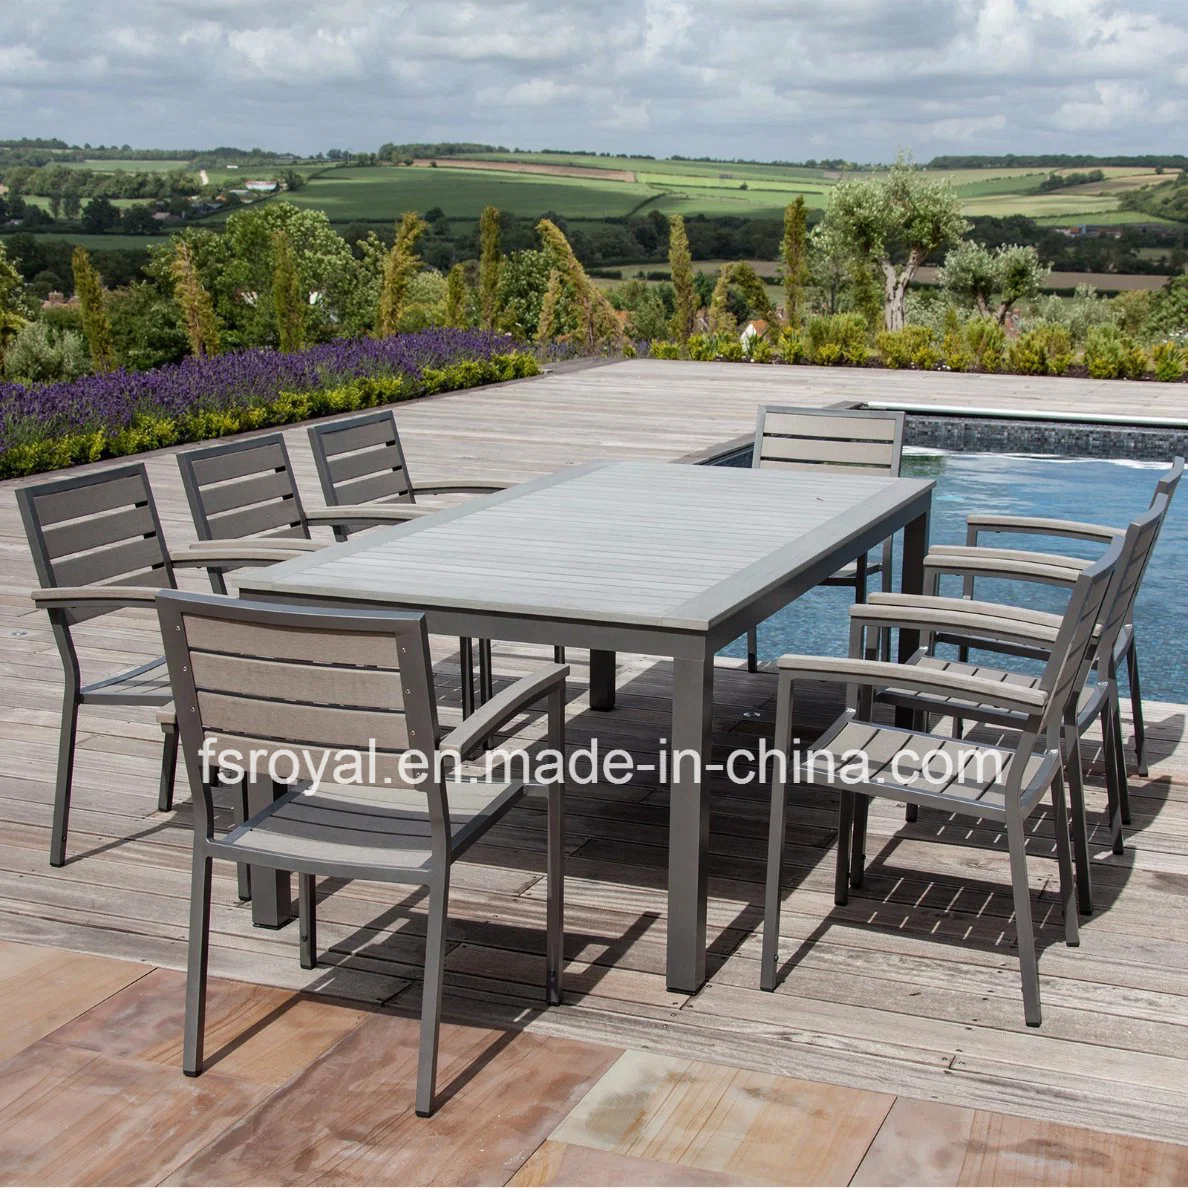 Wholesale Garden Furniture Outdoor Synthetic Wood Furniture Dining Set Hotel Aluminum Table & Chairs Set Patio Dining Furniture